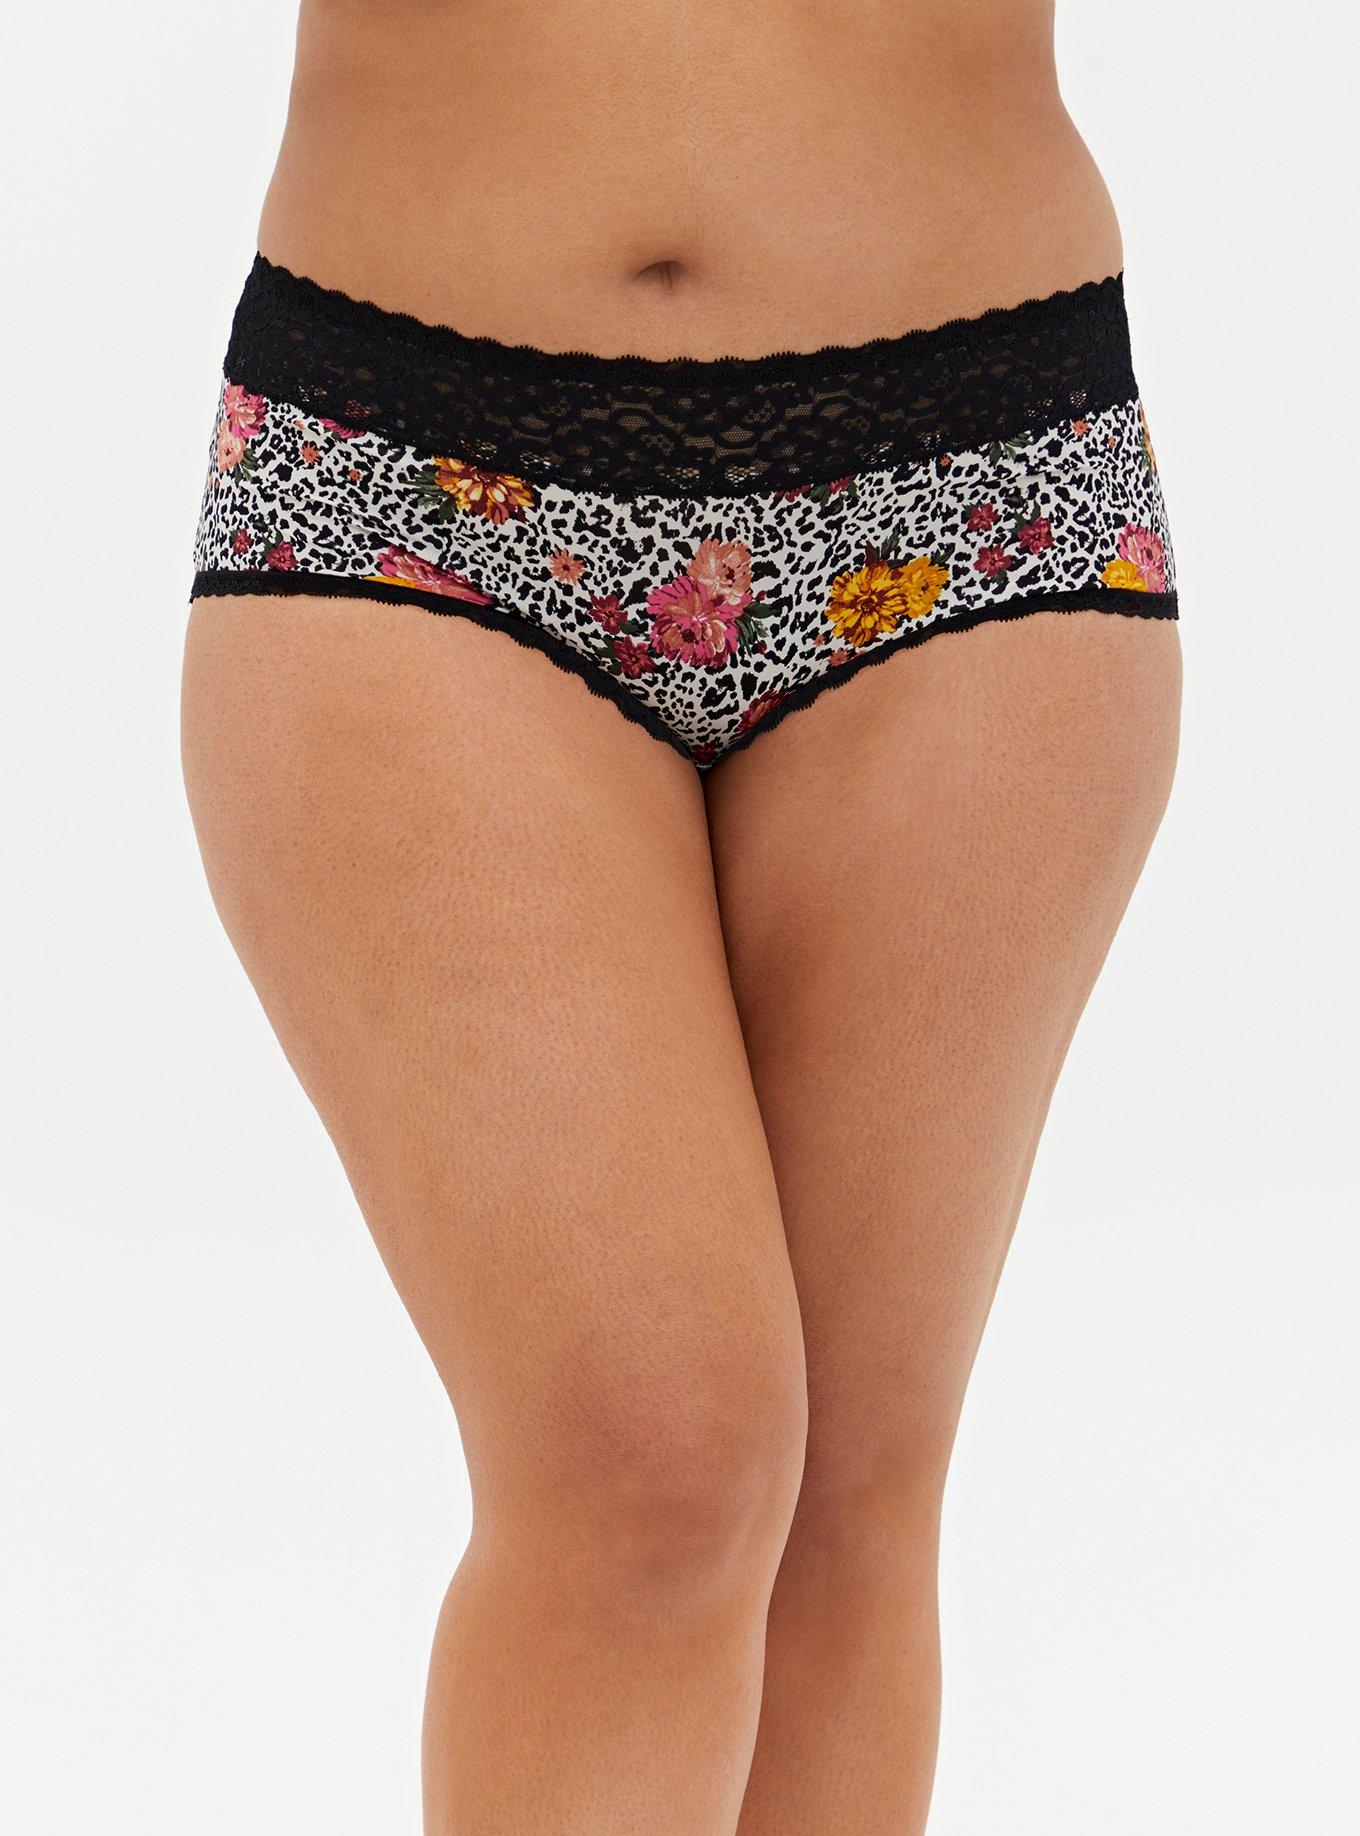 Plus Size - Second Skin Mid-Rise Cheeky Lace Trim Panty - Torrid